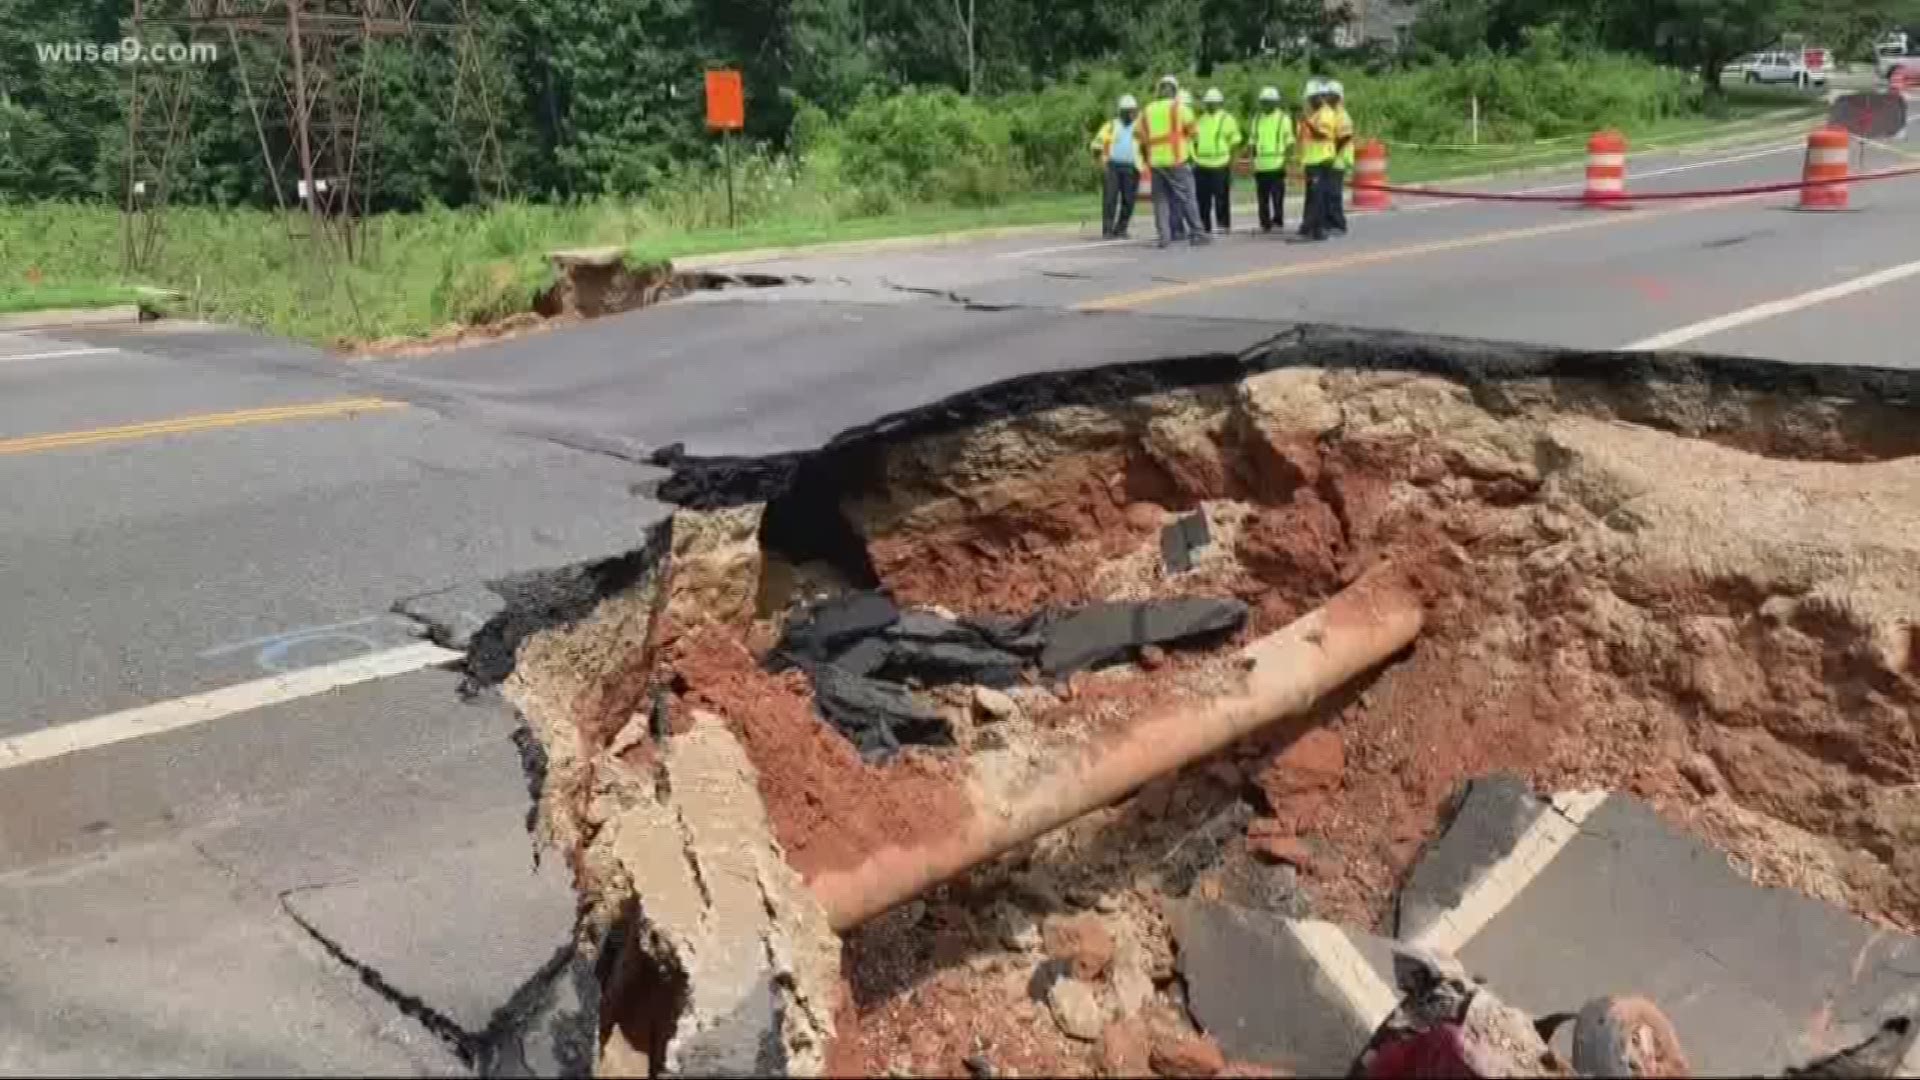 The sinkhole swallowed a car.